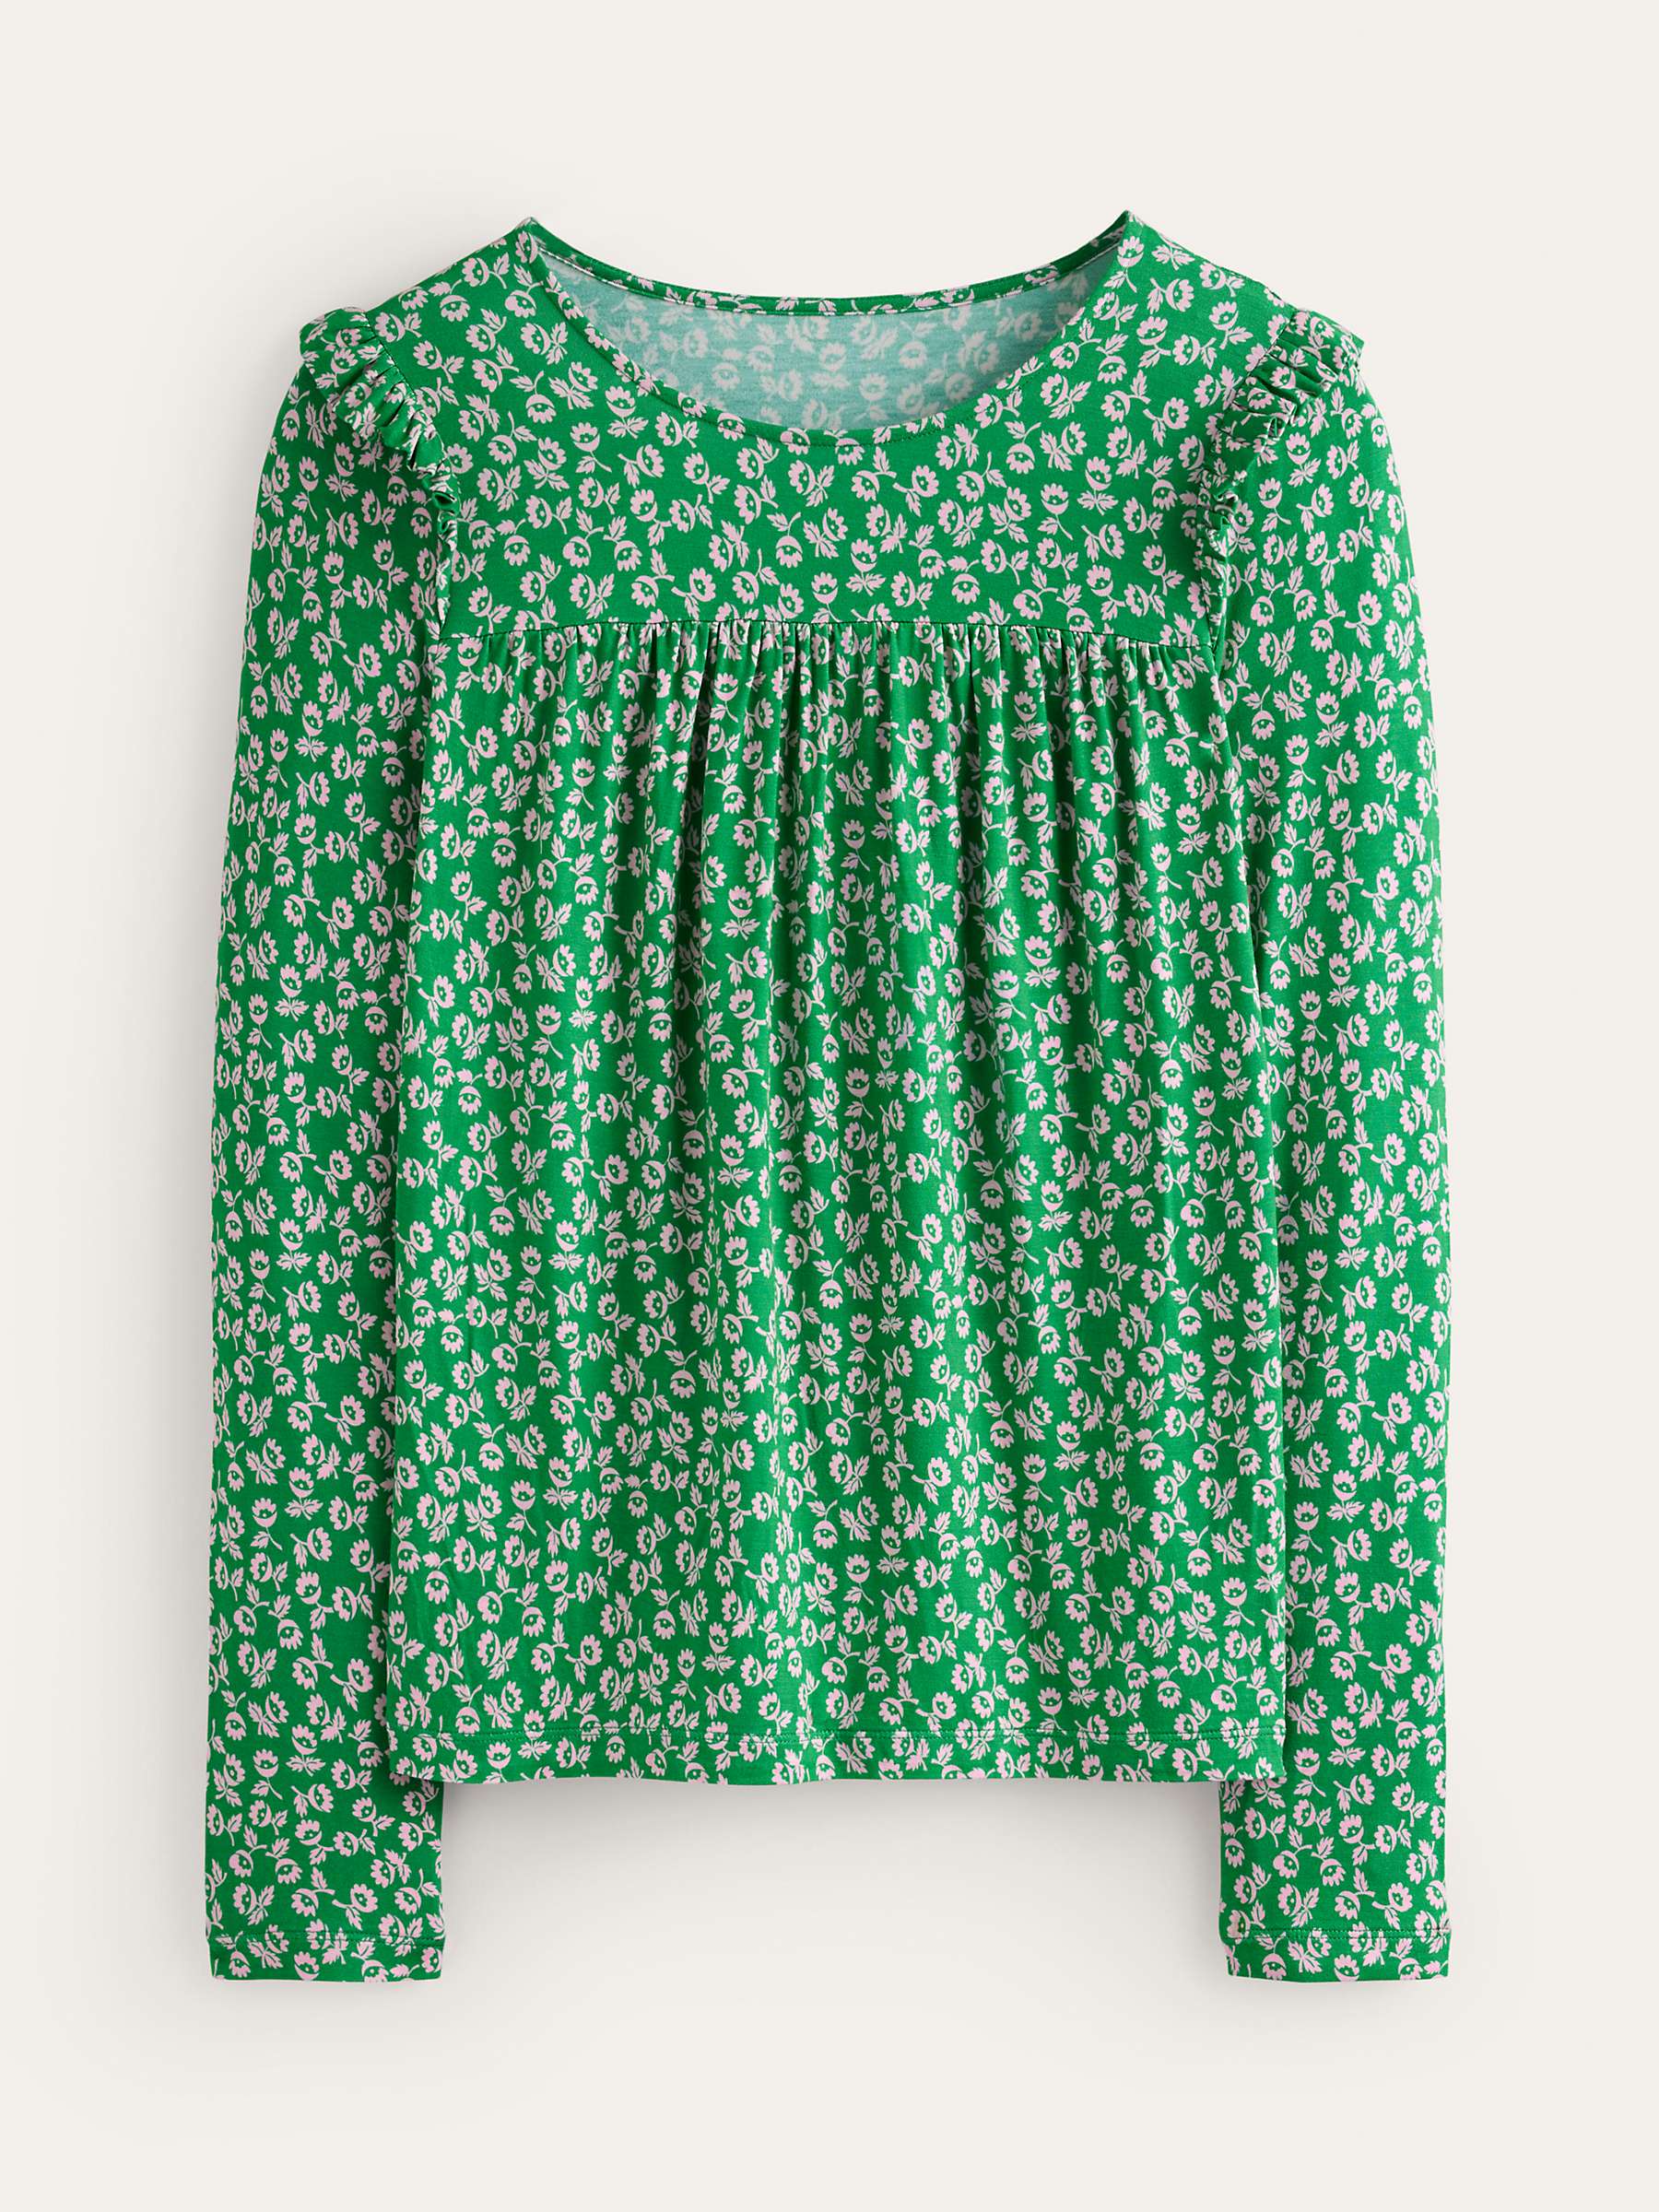 Buy Boden Frill Ditsy Bud Floral Top, Green Online at johnlewis.com